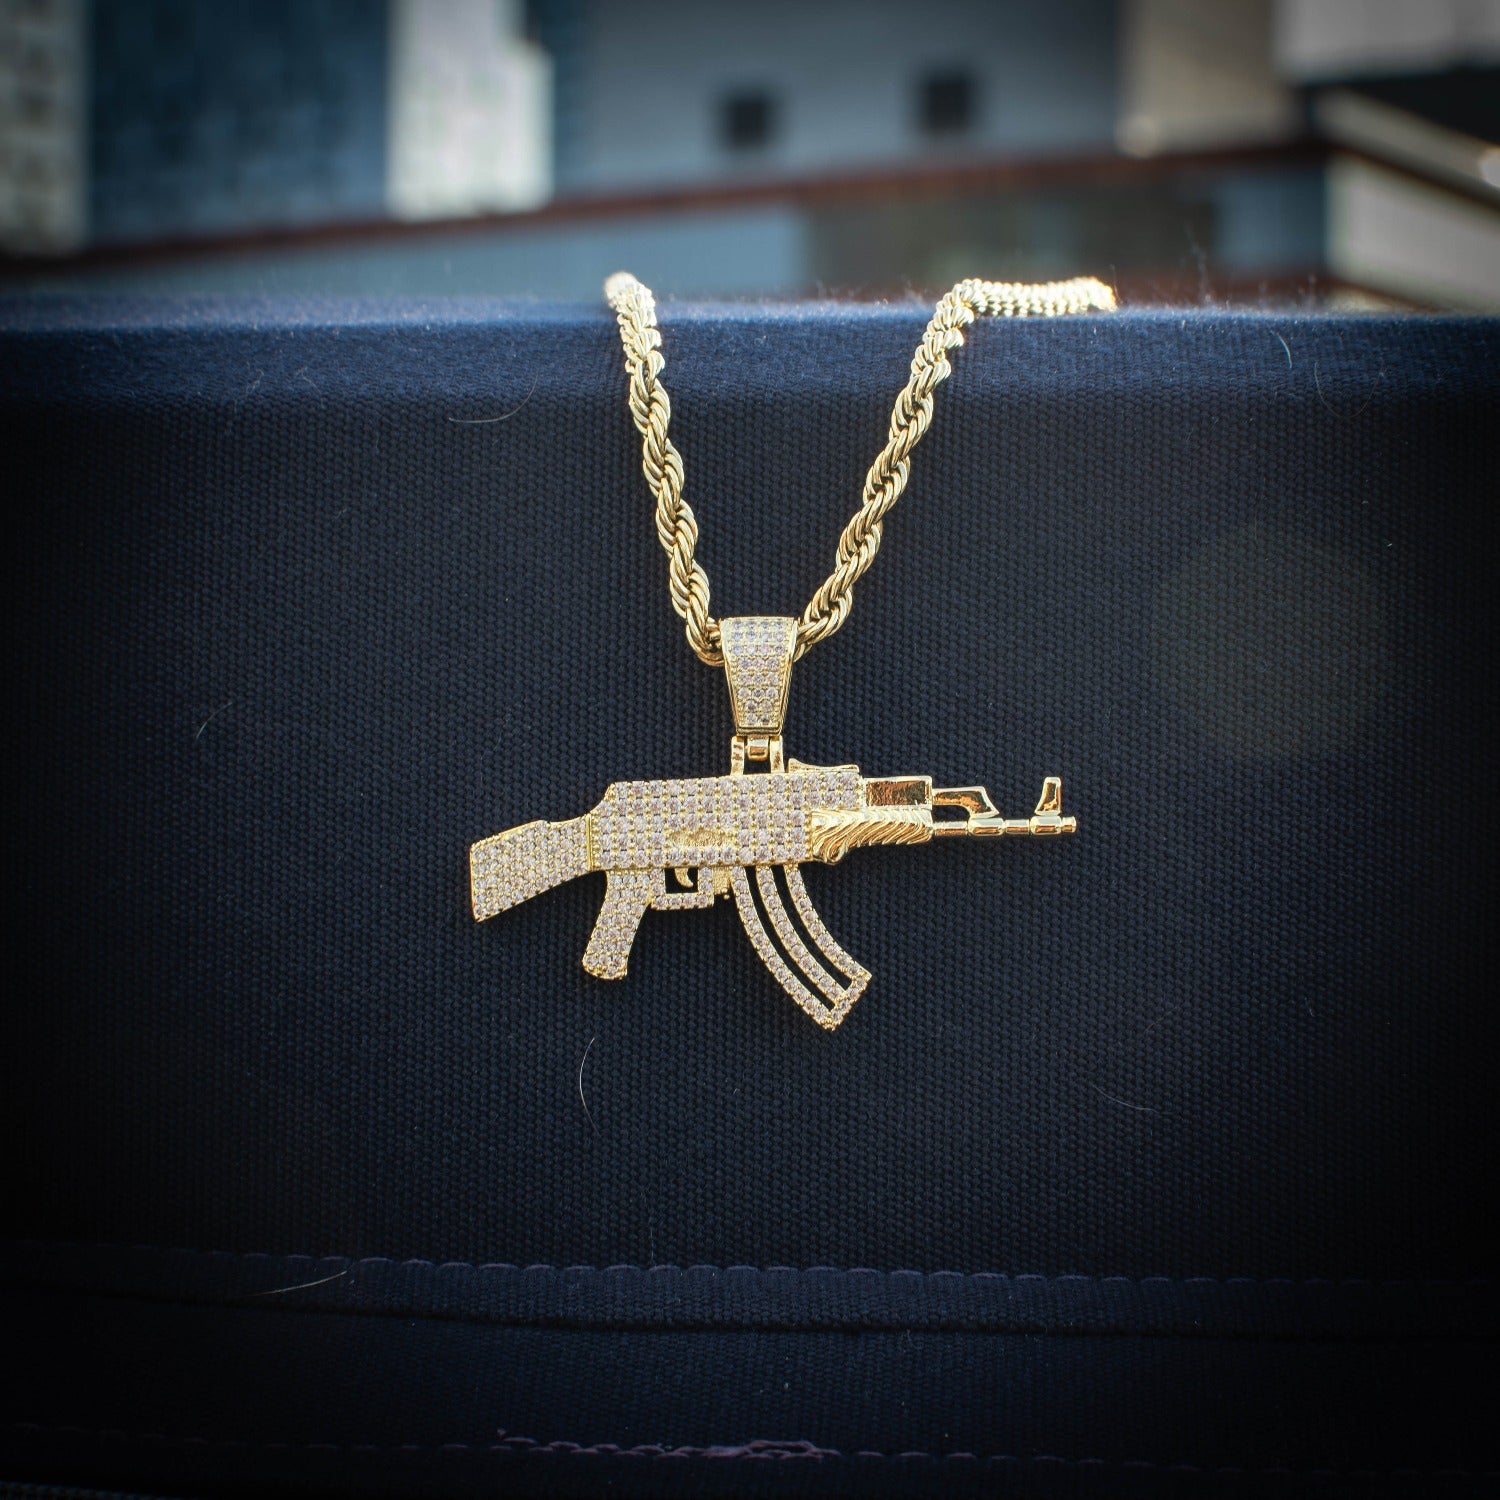 Buy 10K Solid Yellow White Rose Gold Rifle Gun Pendant AK-47 Machine  Necklace Charm Online in India - Etsy